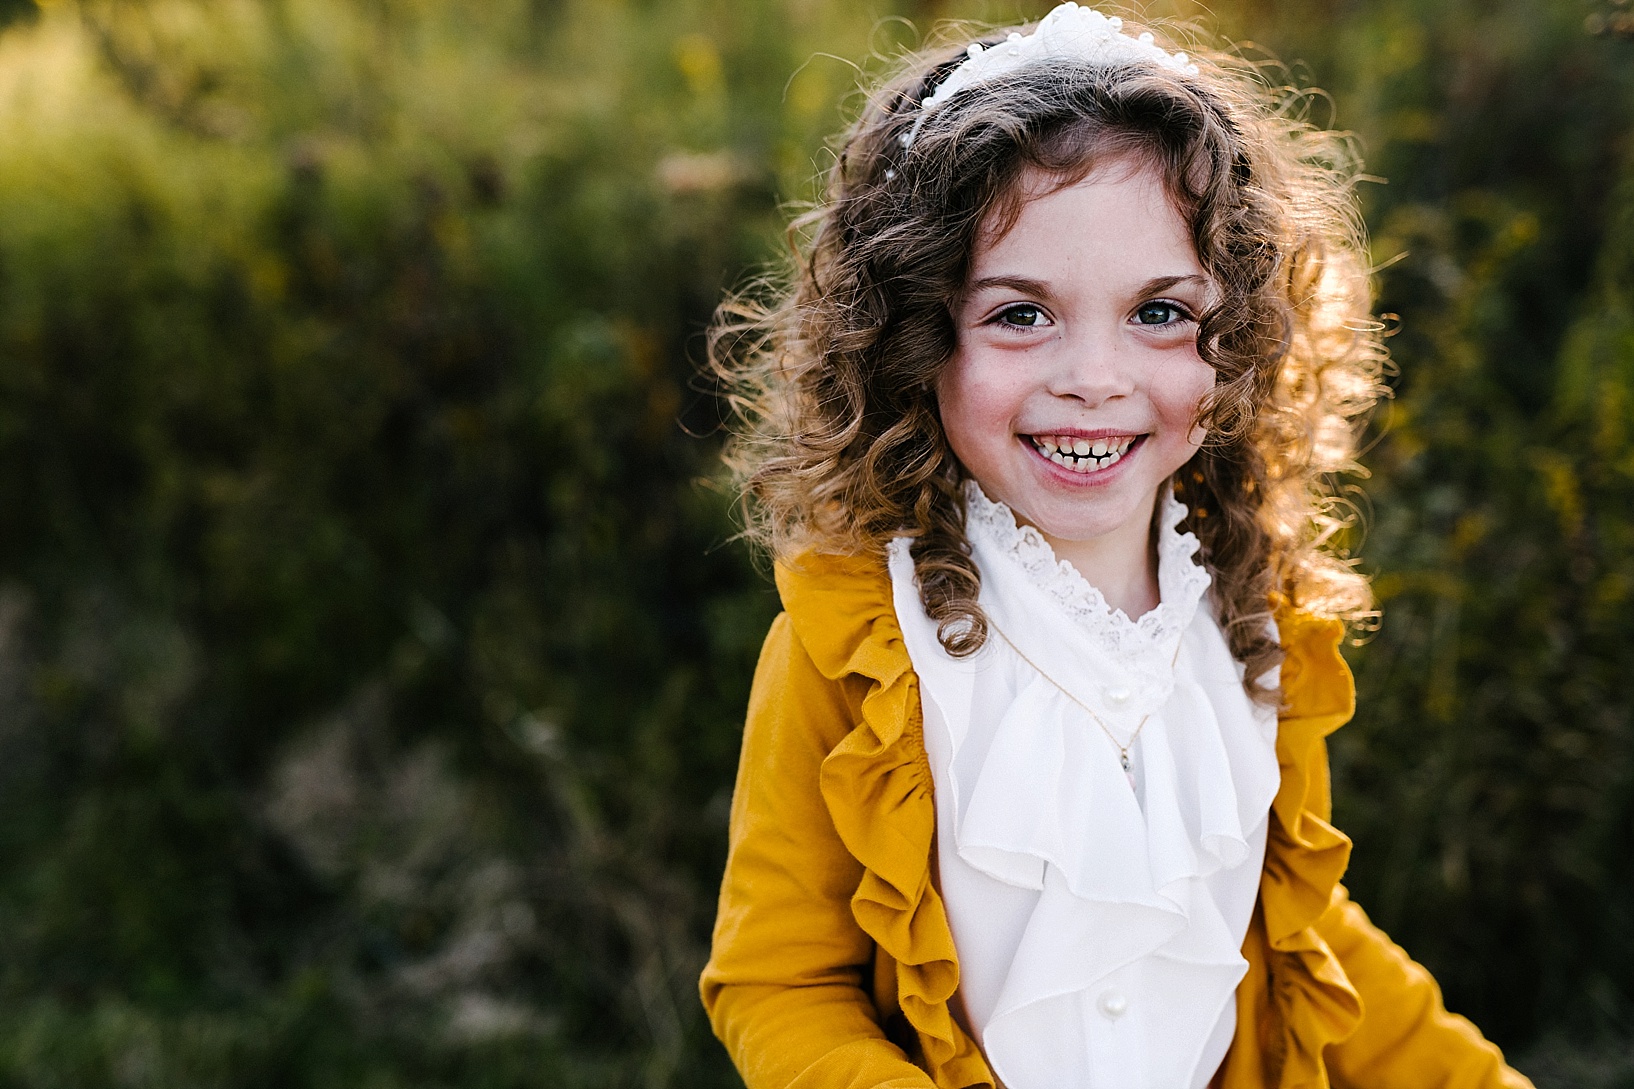 young girl with curly hair wearing mustard yellow sweater smiling at camera